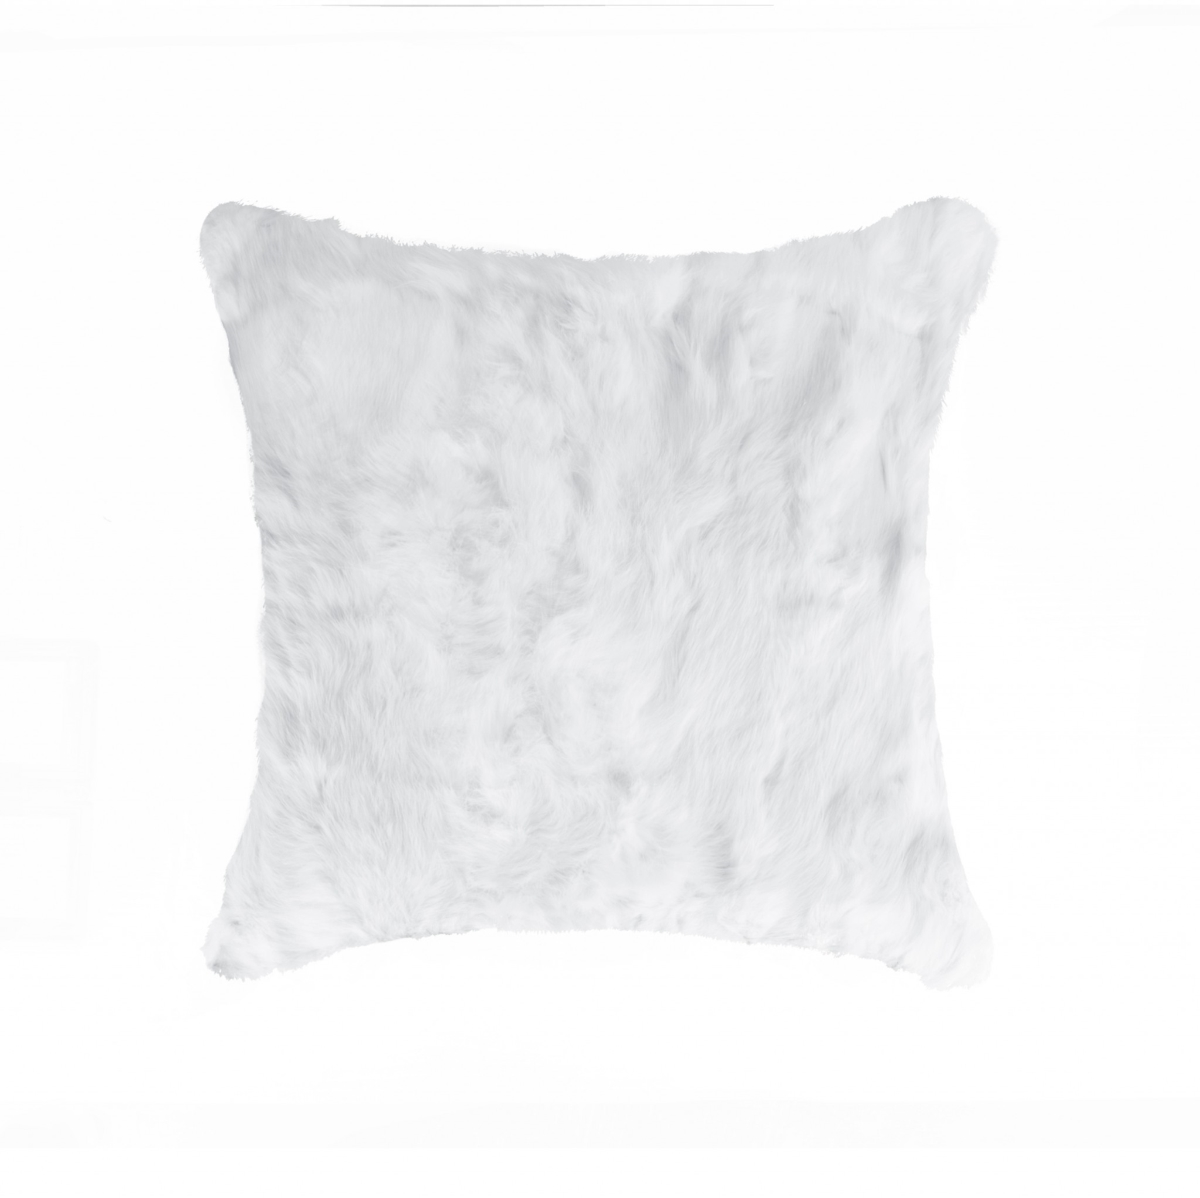 Picture of HomeRoots 358155 5 x 18 x 18 in. 100 Percent Natural Rabbit Fur White Pillow